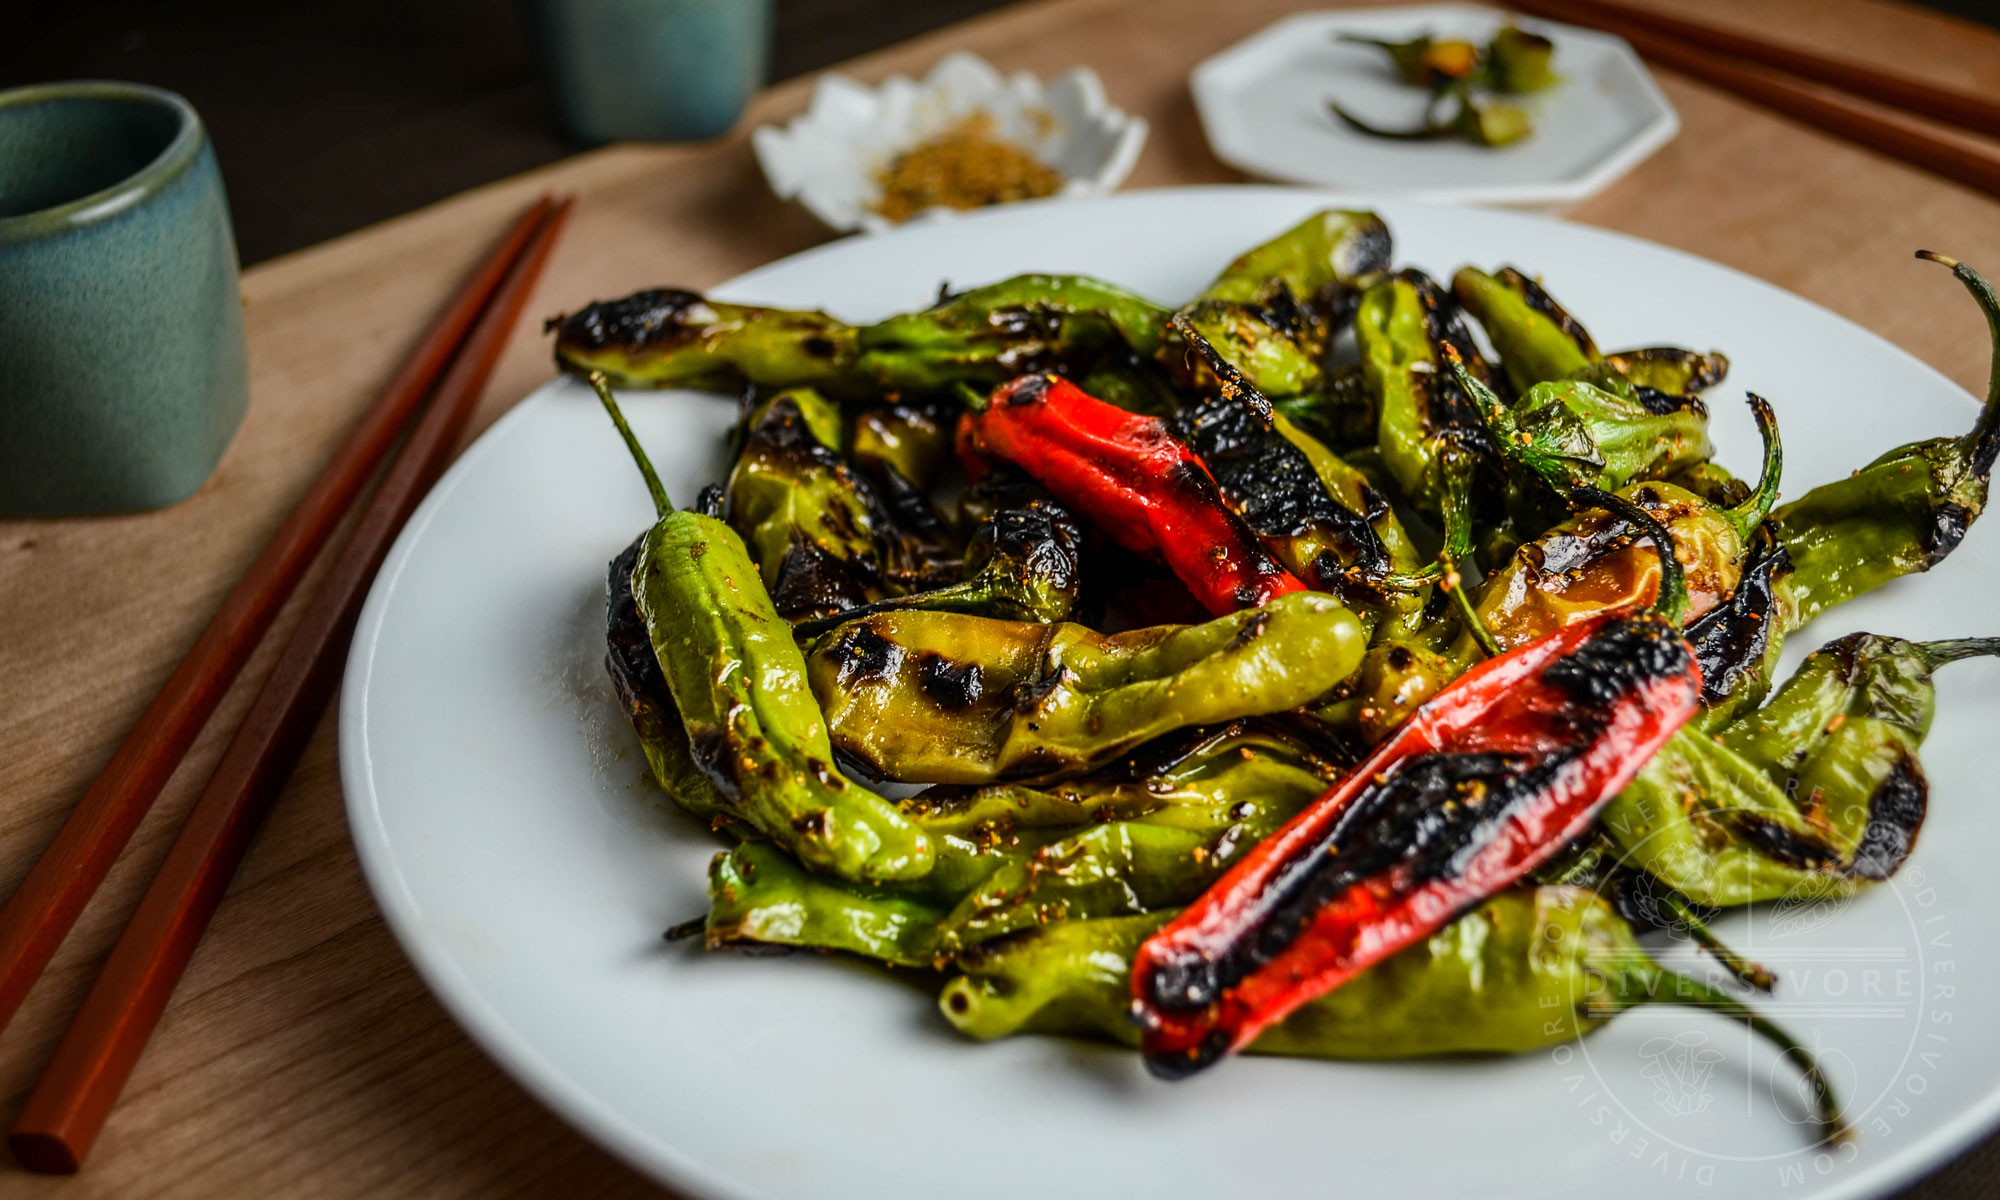 Featured image for “Charred Shishito Peppers with Sweet Togarashi Spice”